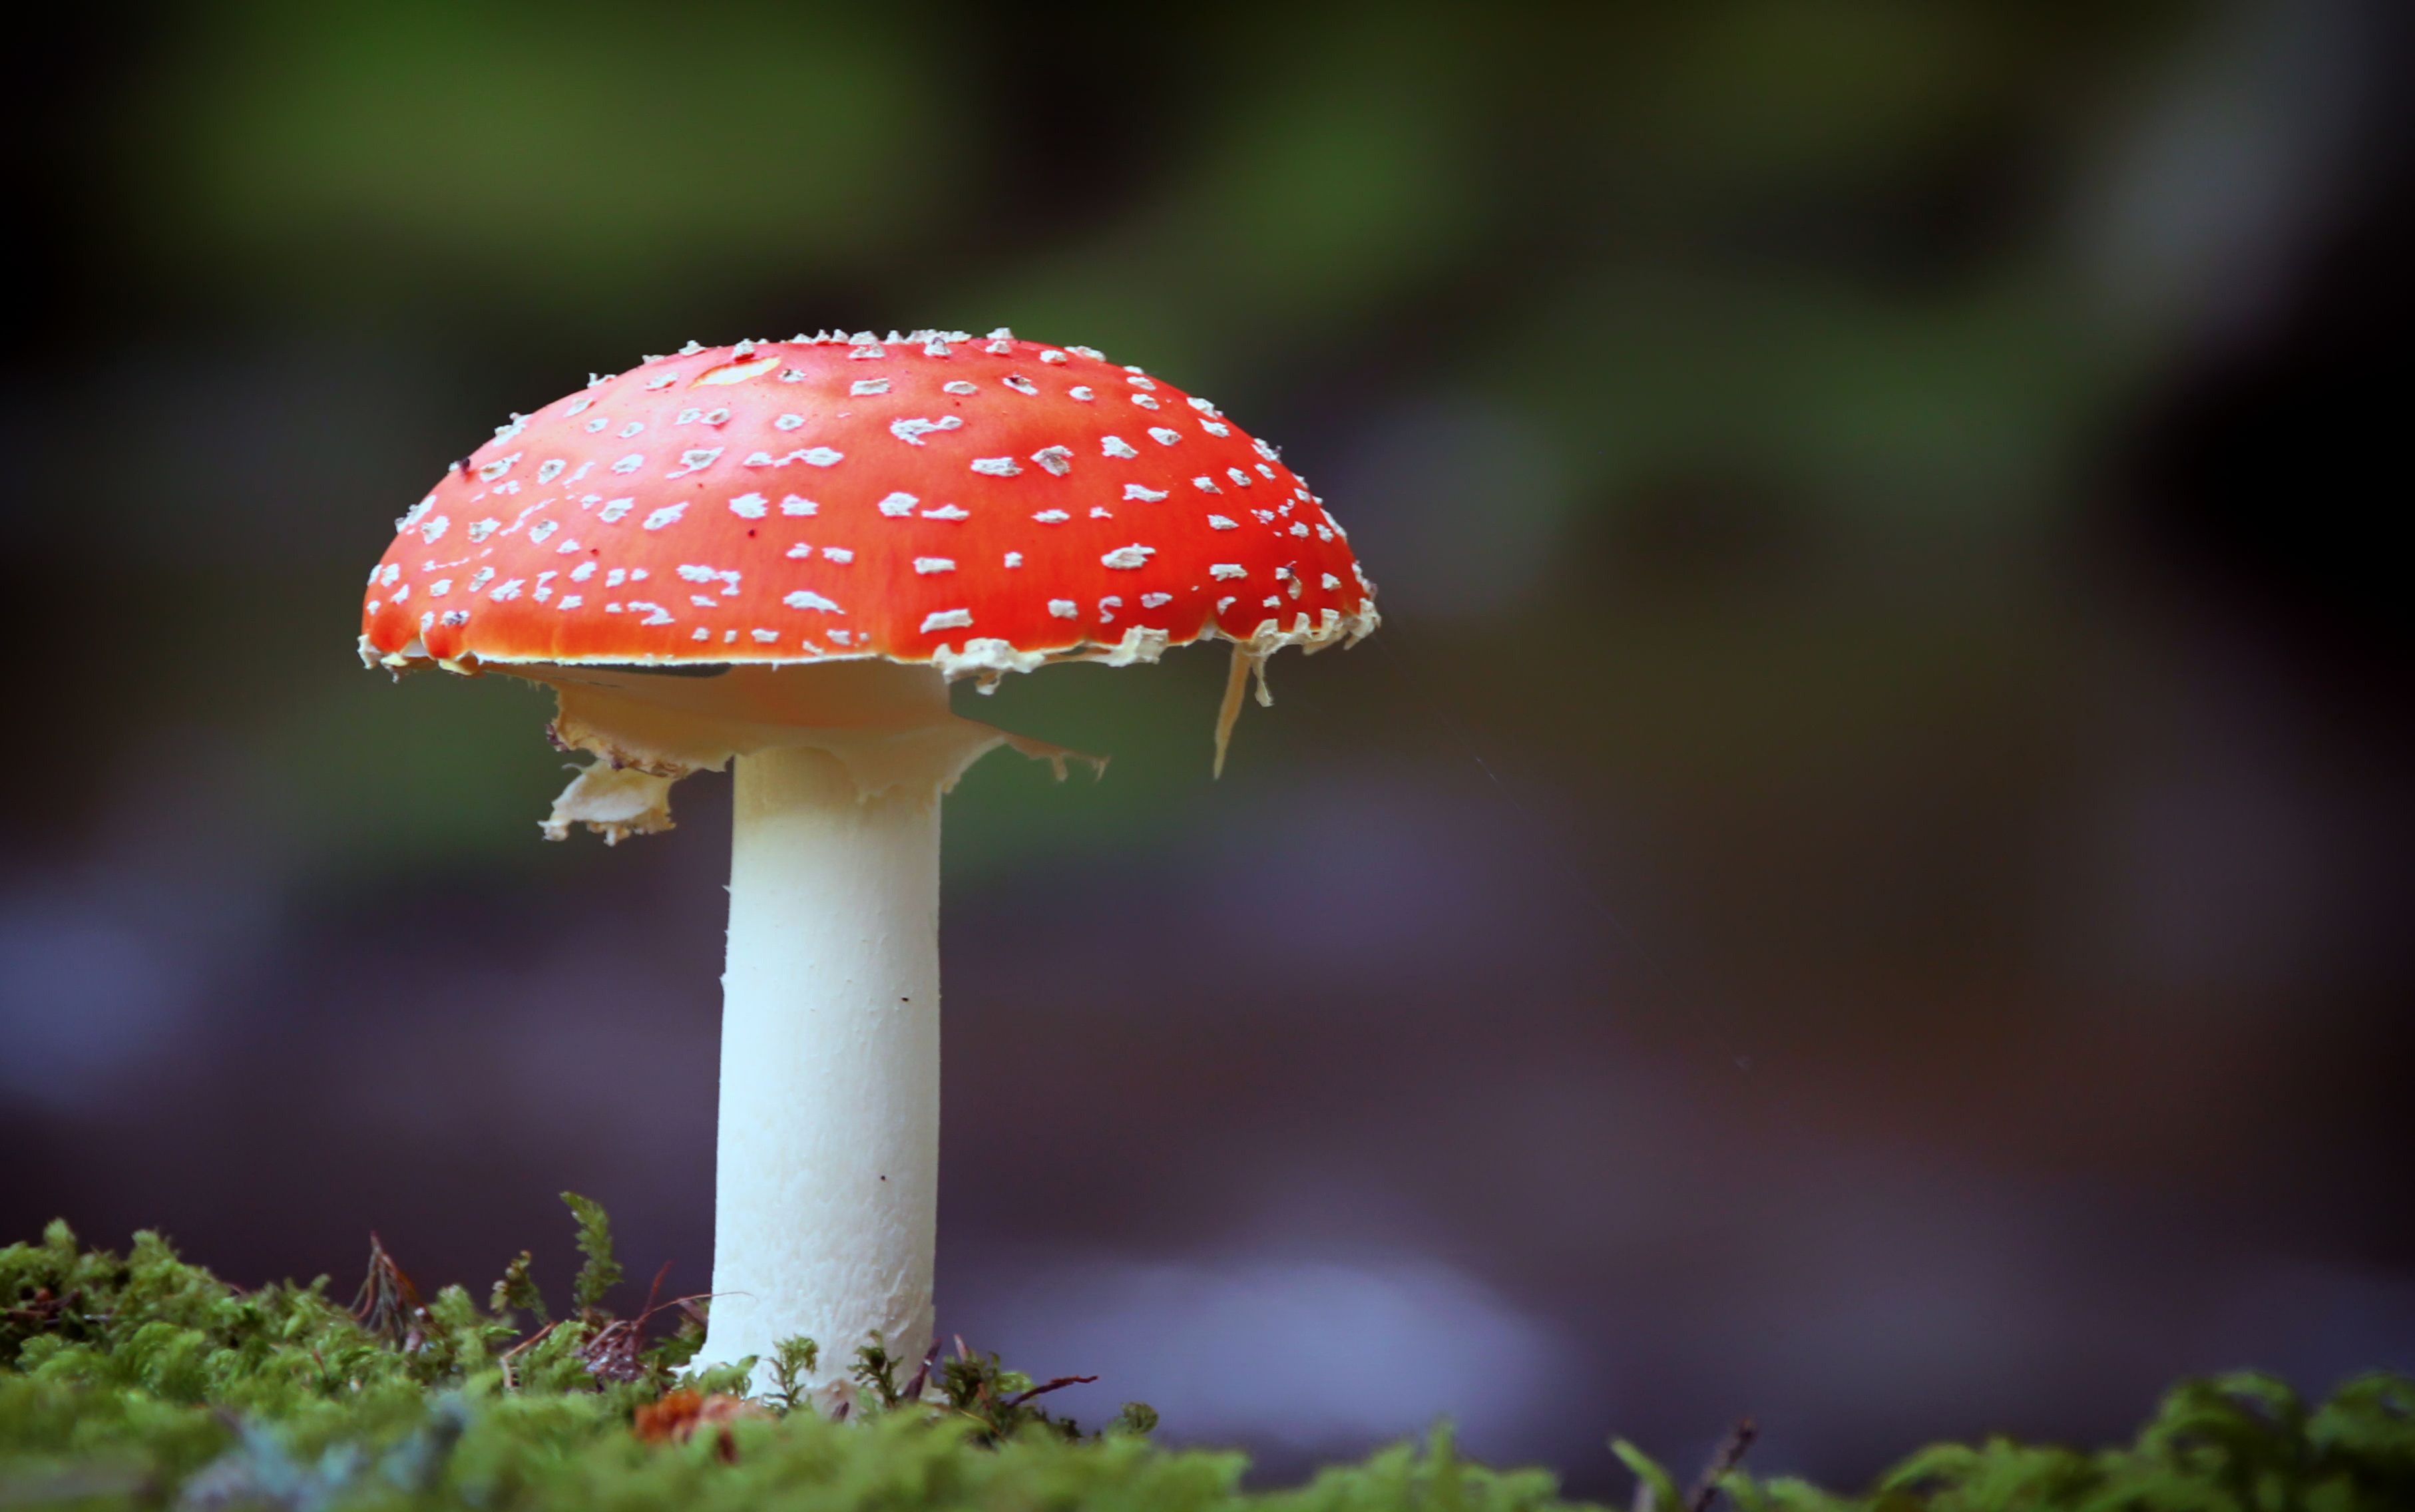 The fly agaric is a side view